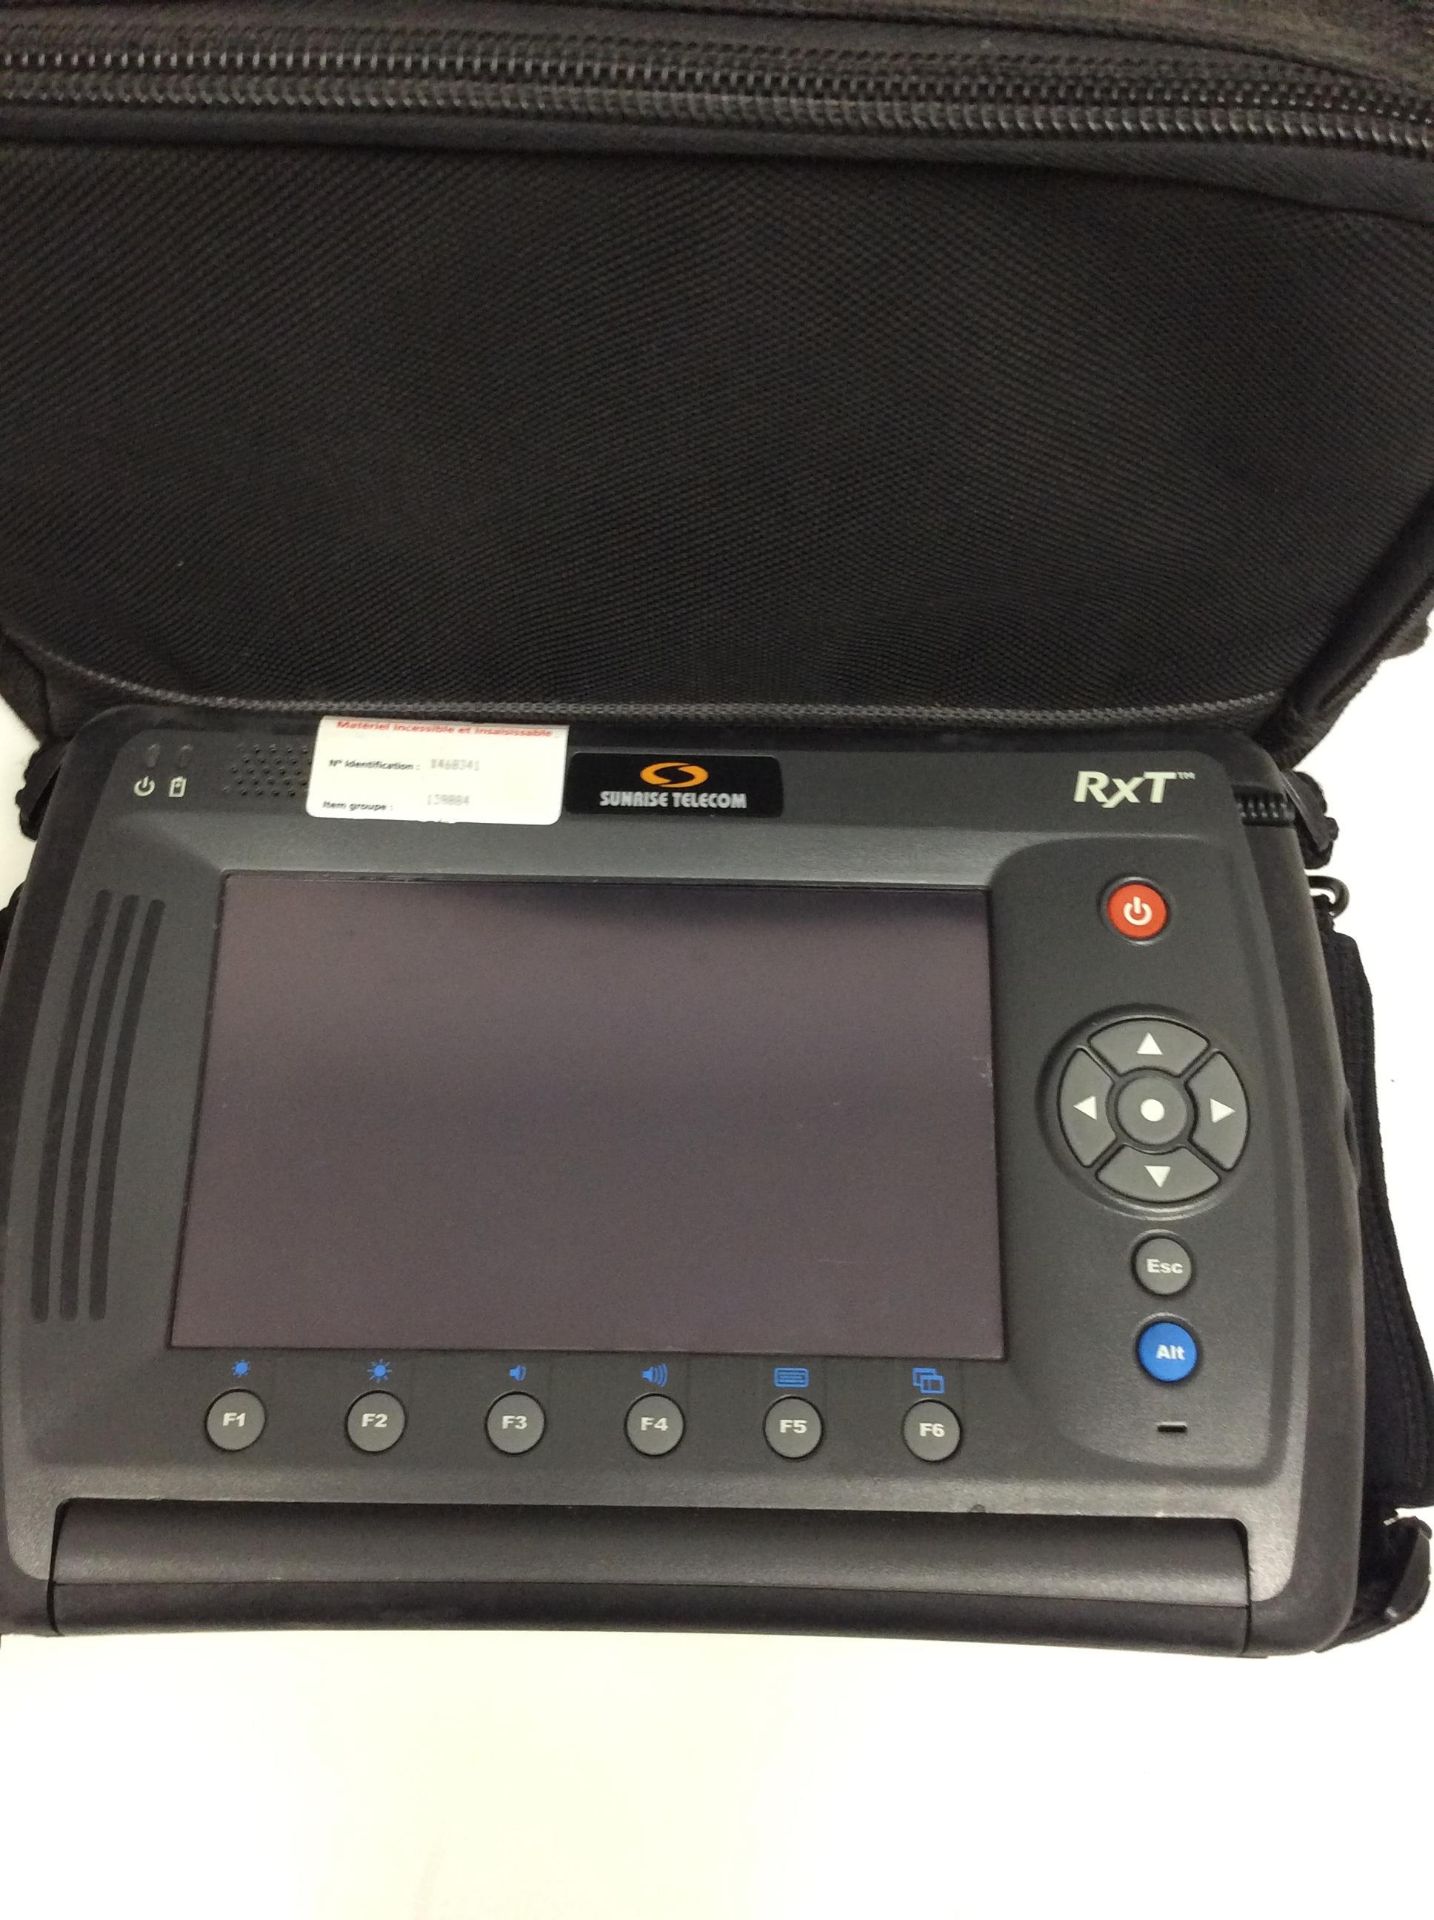 Sunrise telecom rxt2000a tdr dmm dsl test meter time domain reflectometer with 2 carrier modulues - Image 2 of 4